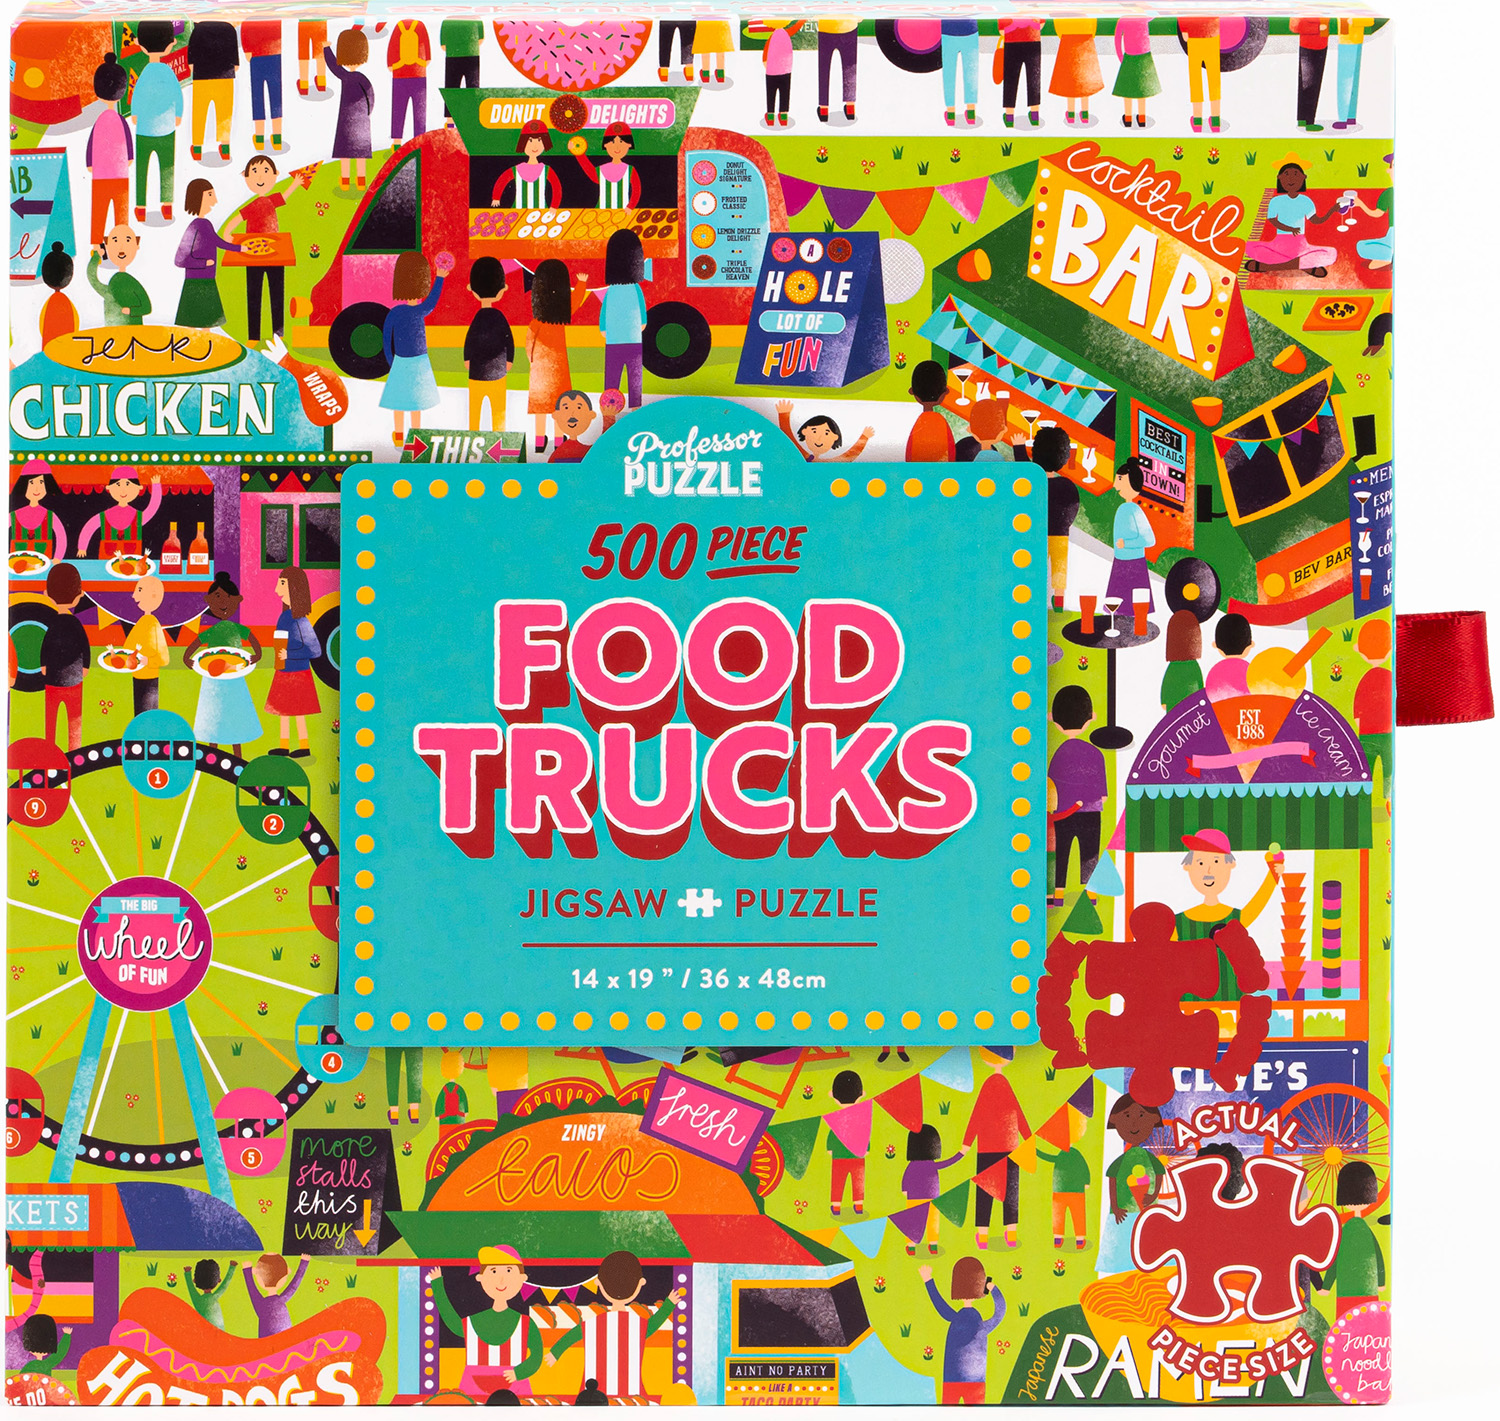 Food Trucks Food and Drink Jigsaw Puzzle